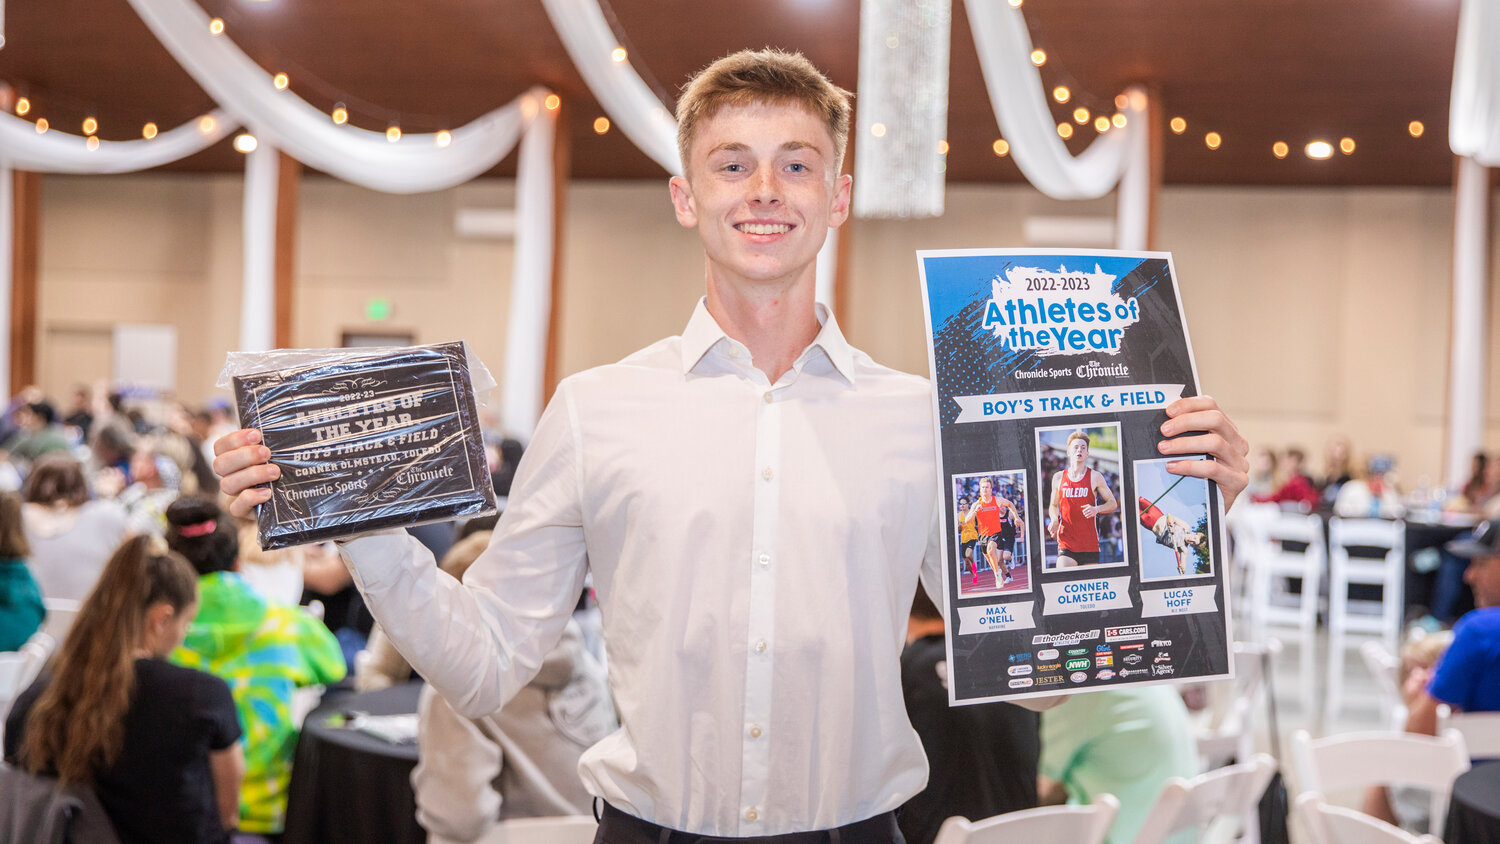 Toledo’s Conner Olmstead smiles for a photo Tuesday evening during the “Athletes of the Year” banquet at the Jester Auto Museum. Olmstead, a four event standout, won two individual District Championships in the 400 meter dash and high jump, while also helping the Riverhawks take State titles in the 4x100 meter and 4x400 meter relays.